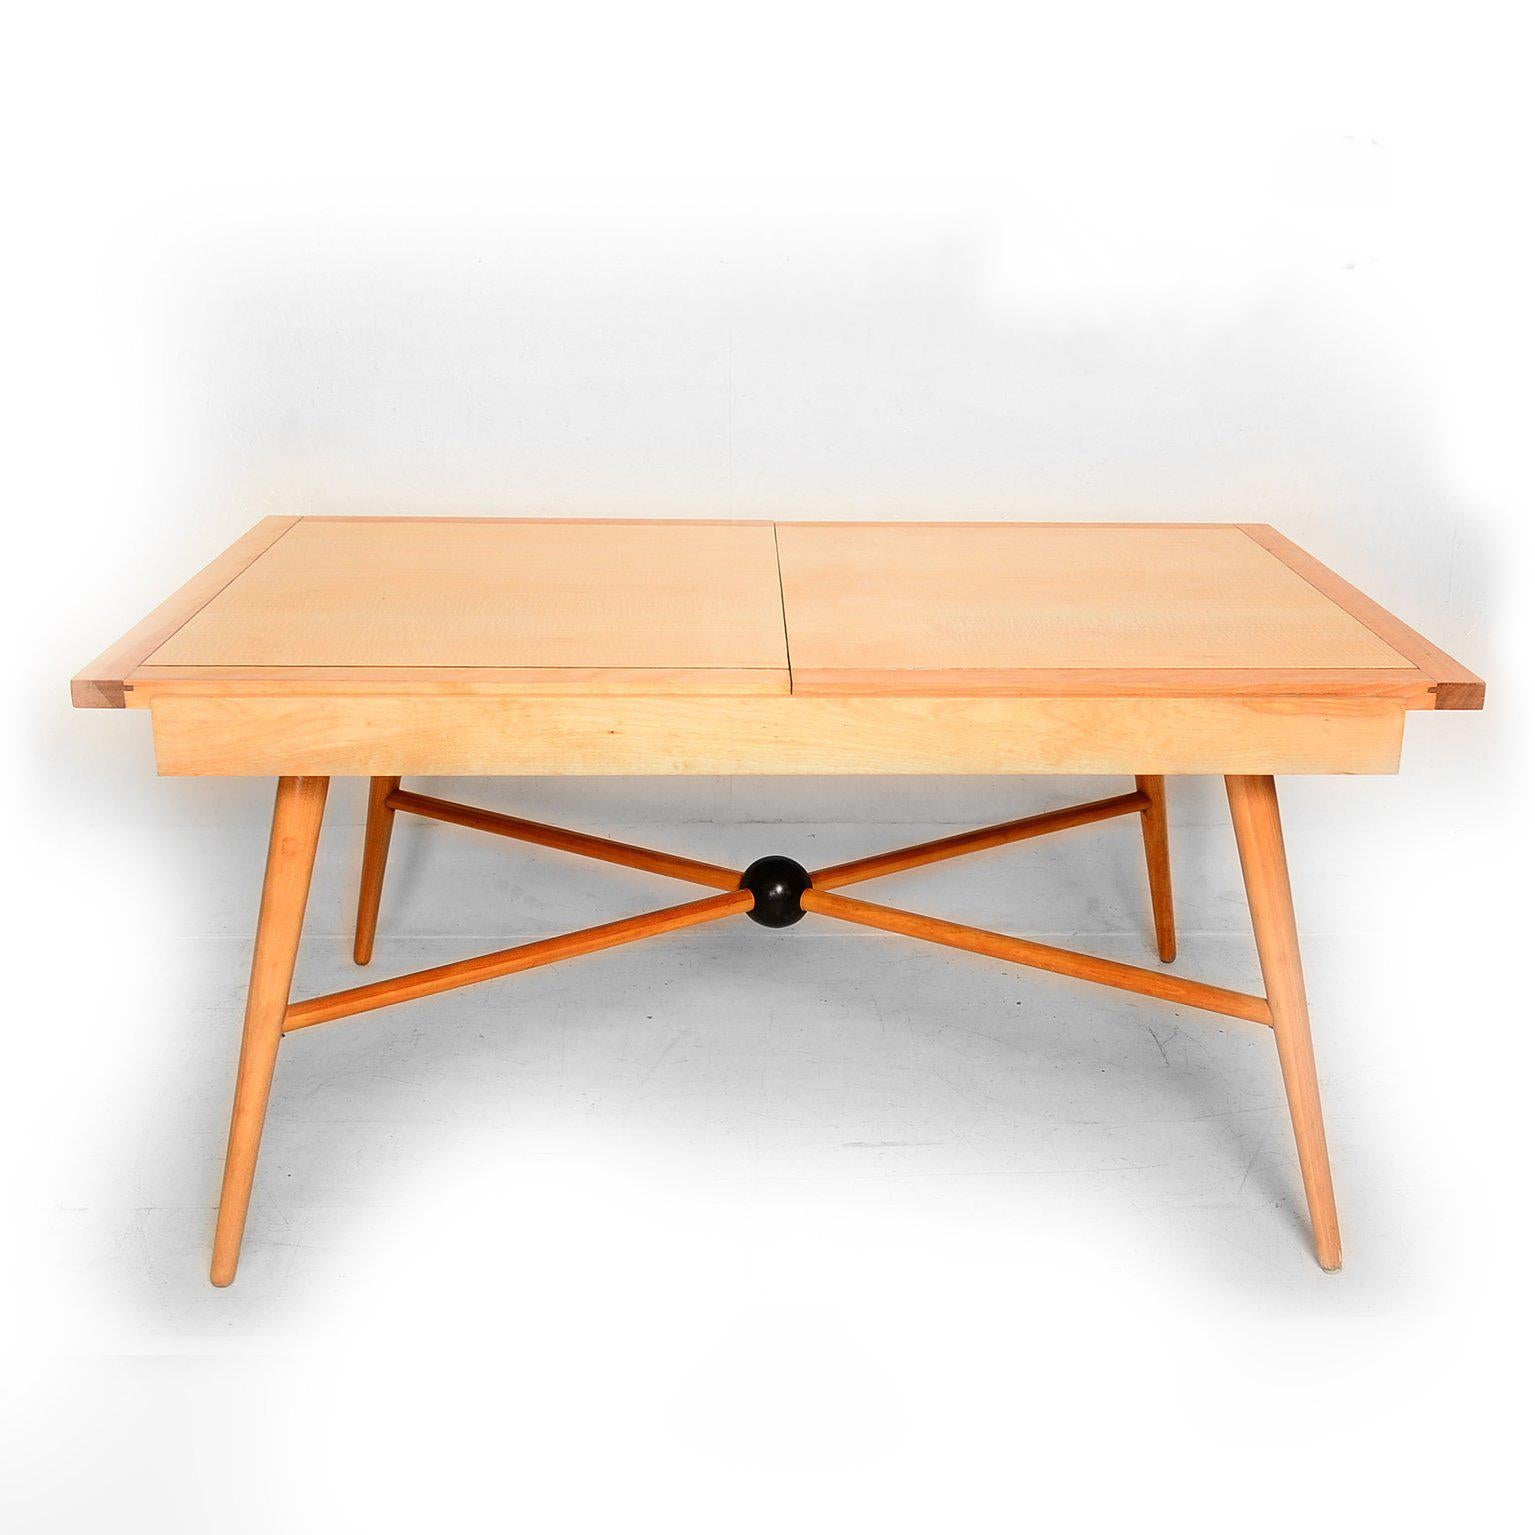 American Mid-Century Modern Maple Table Attributed to McCobb